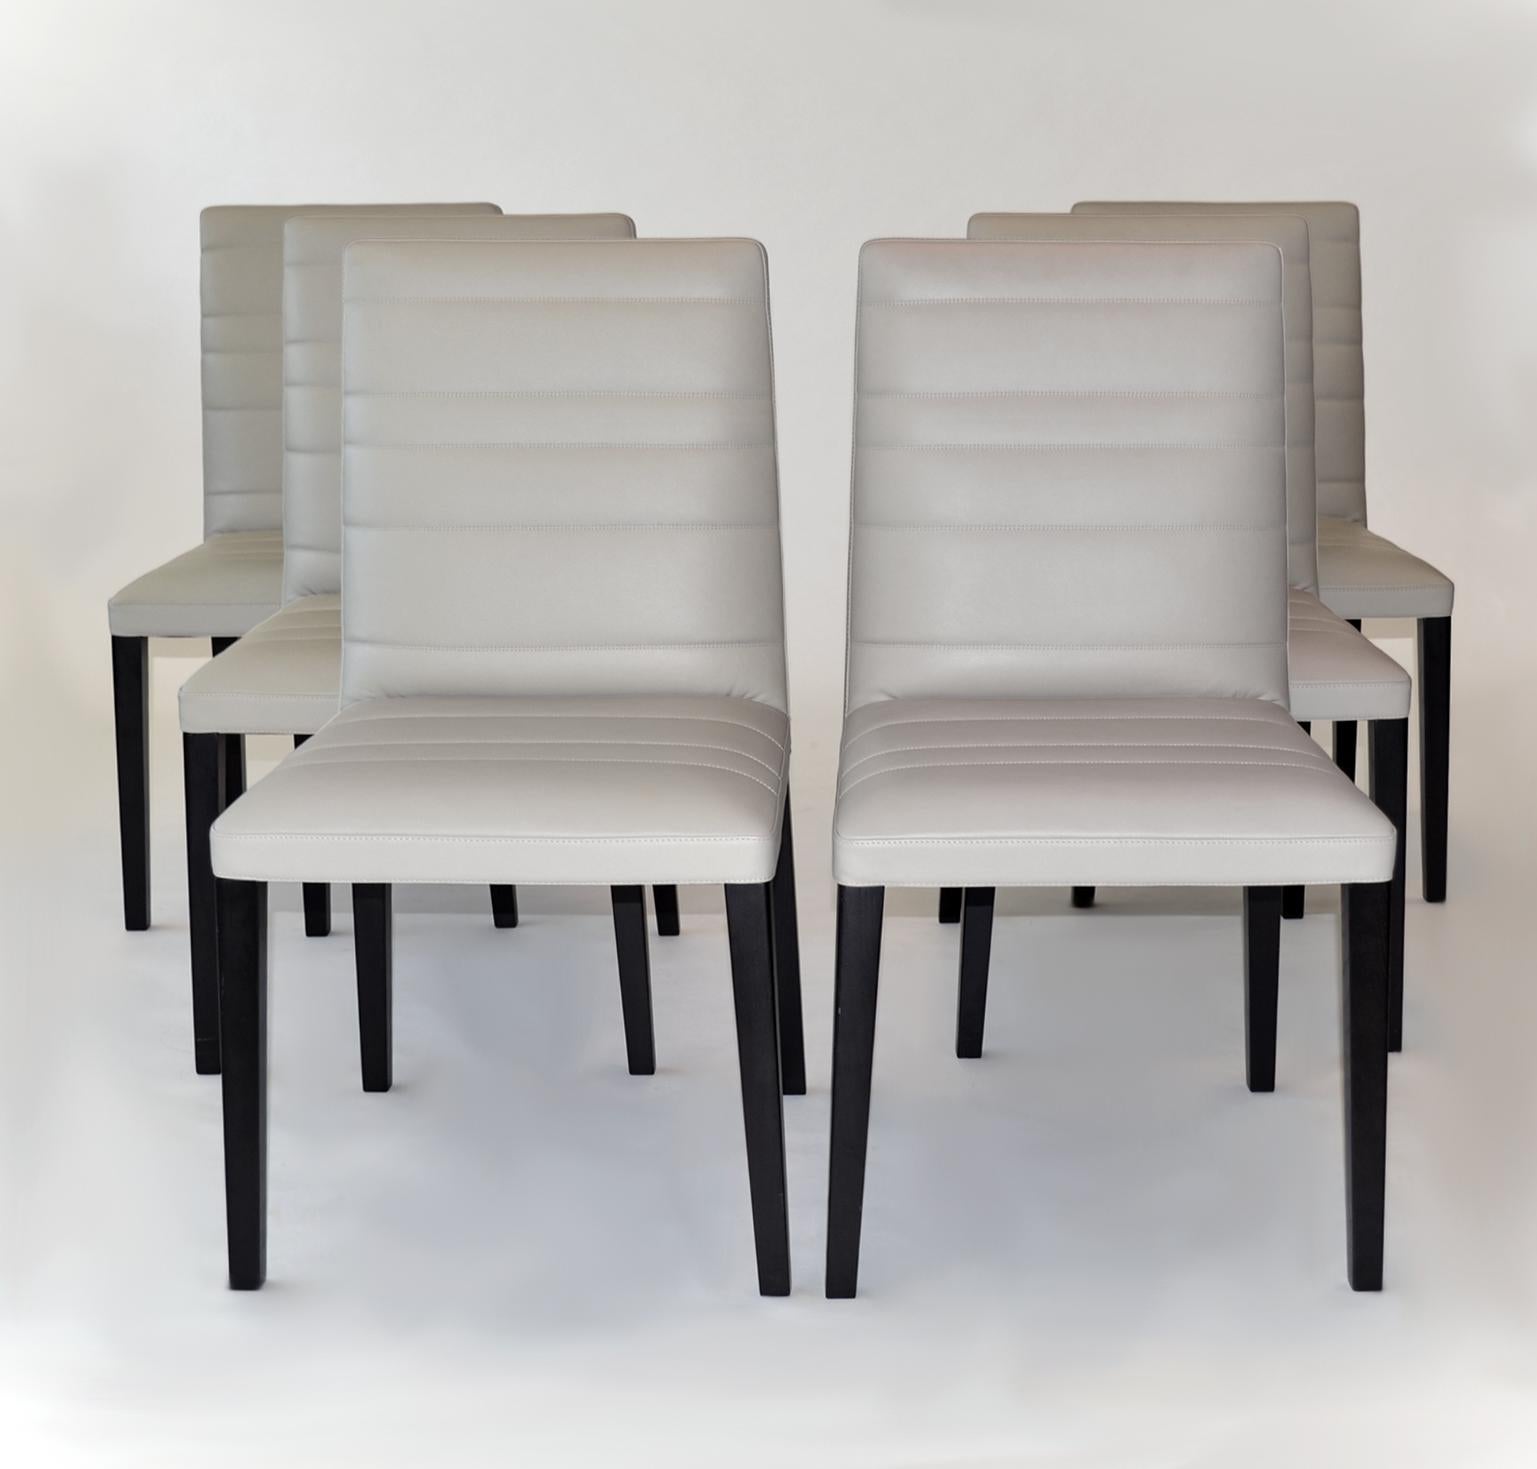 Set of Six Leather and Wood Dining Chairs by Poltrona Frau, 'Louise' 

Color is an light gray to putty. The structure is crafted with solid ash and beech wood with polyurethane foam padding. The springs are made with elastic belts. The legs are